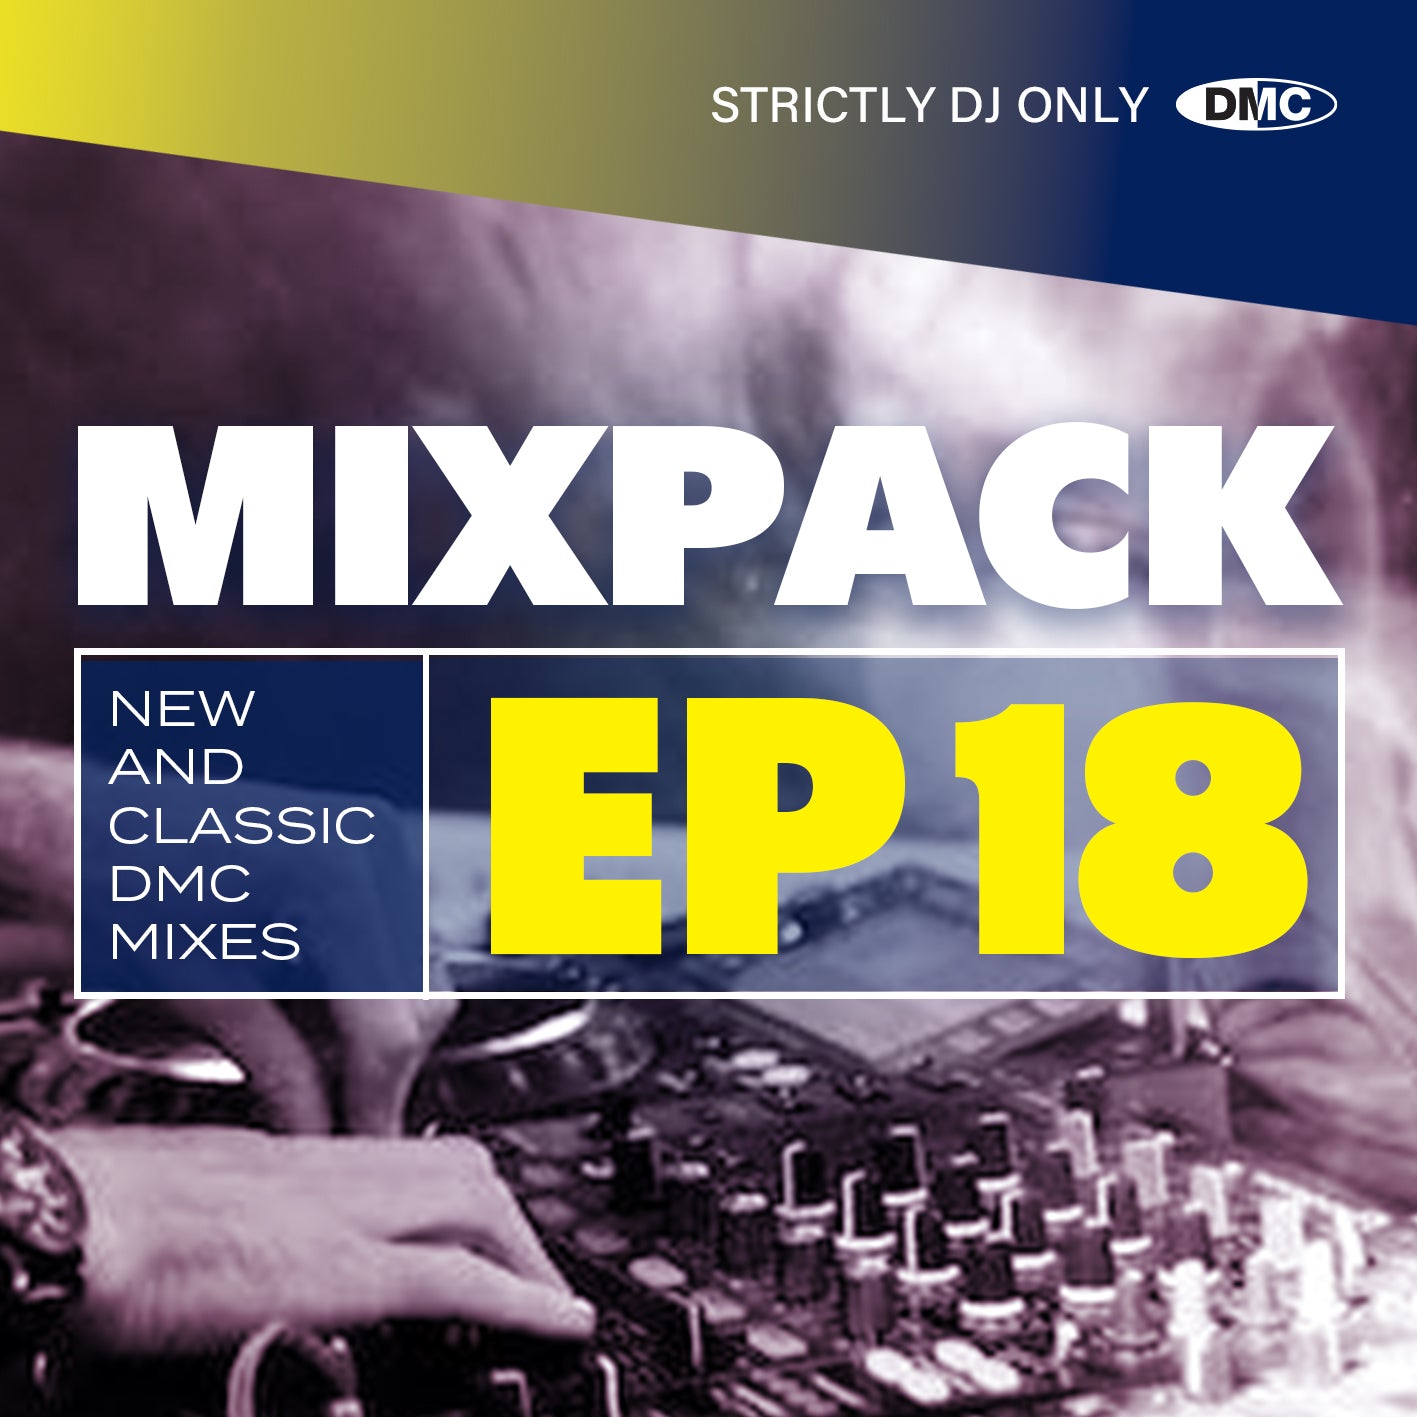 DMC MIXPACK 18 - May 2023 NEW release